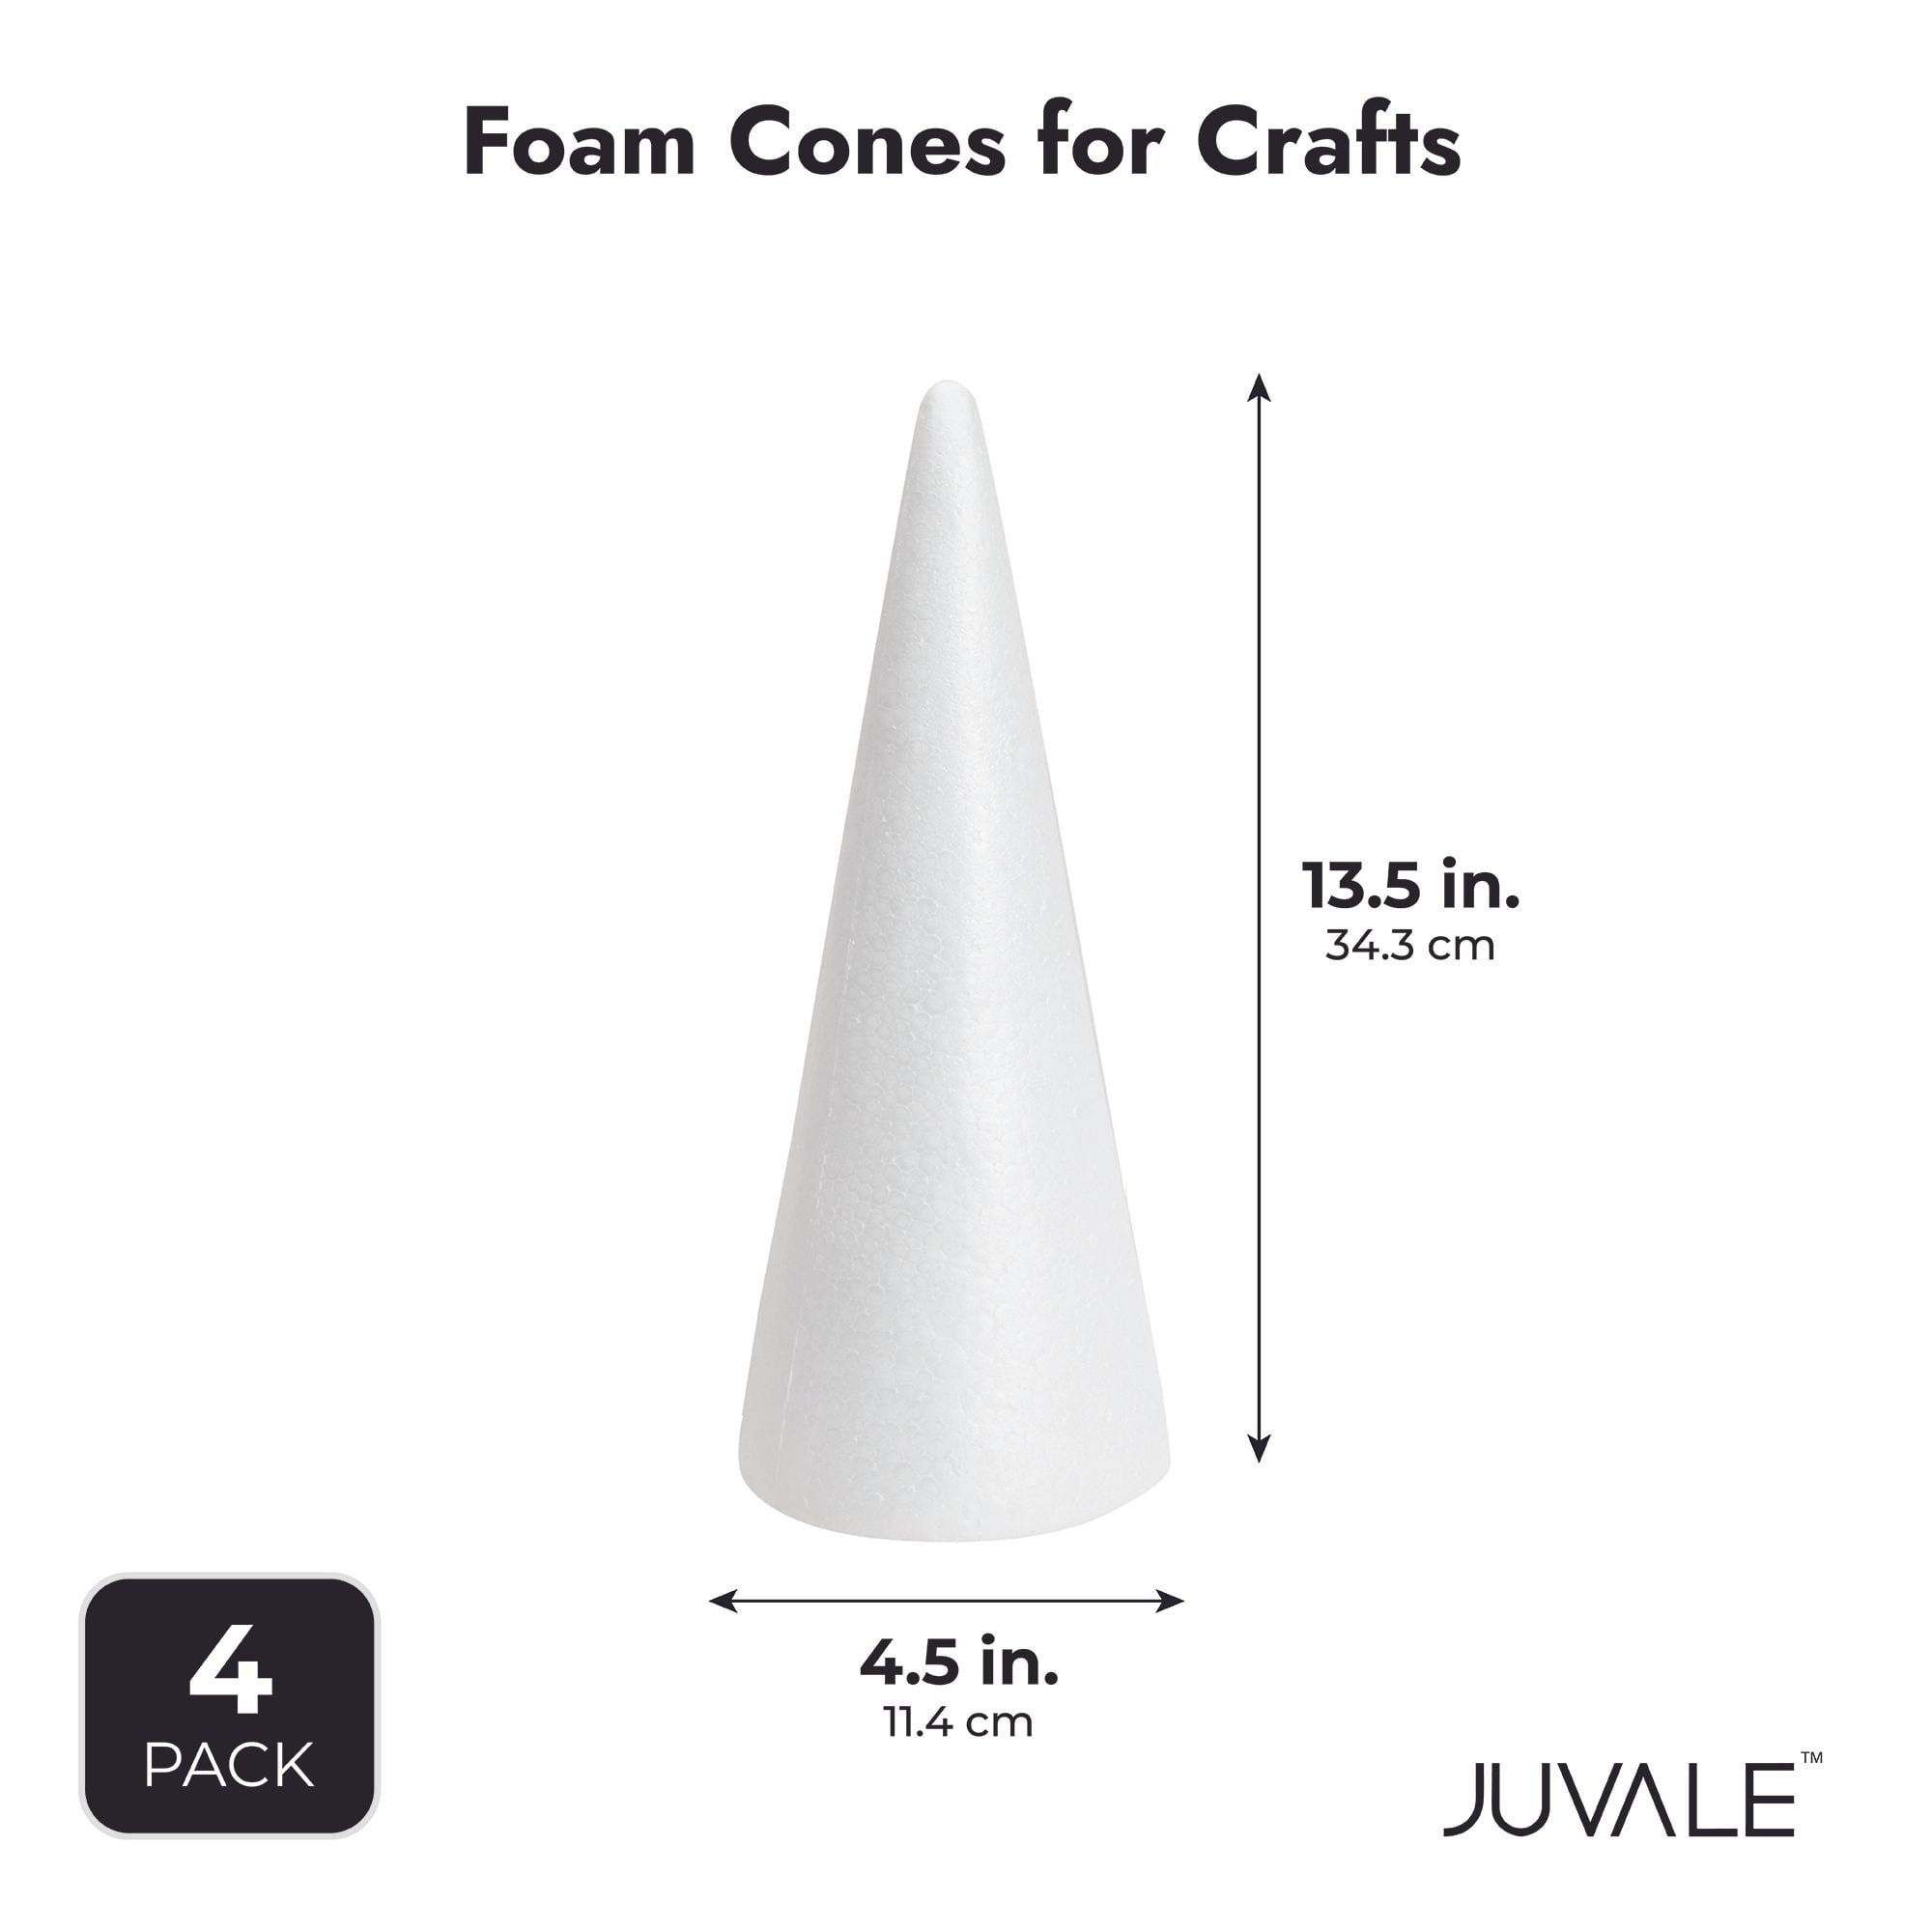 4 Pack Craft Foam - Foam Cones for Crafts, Trees, Holiday Gnomes